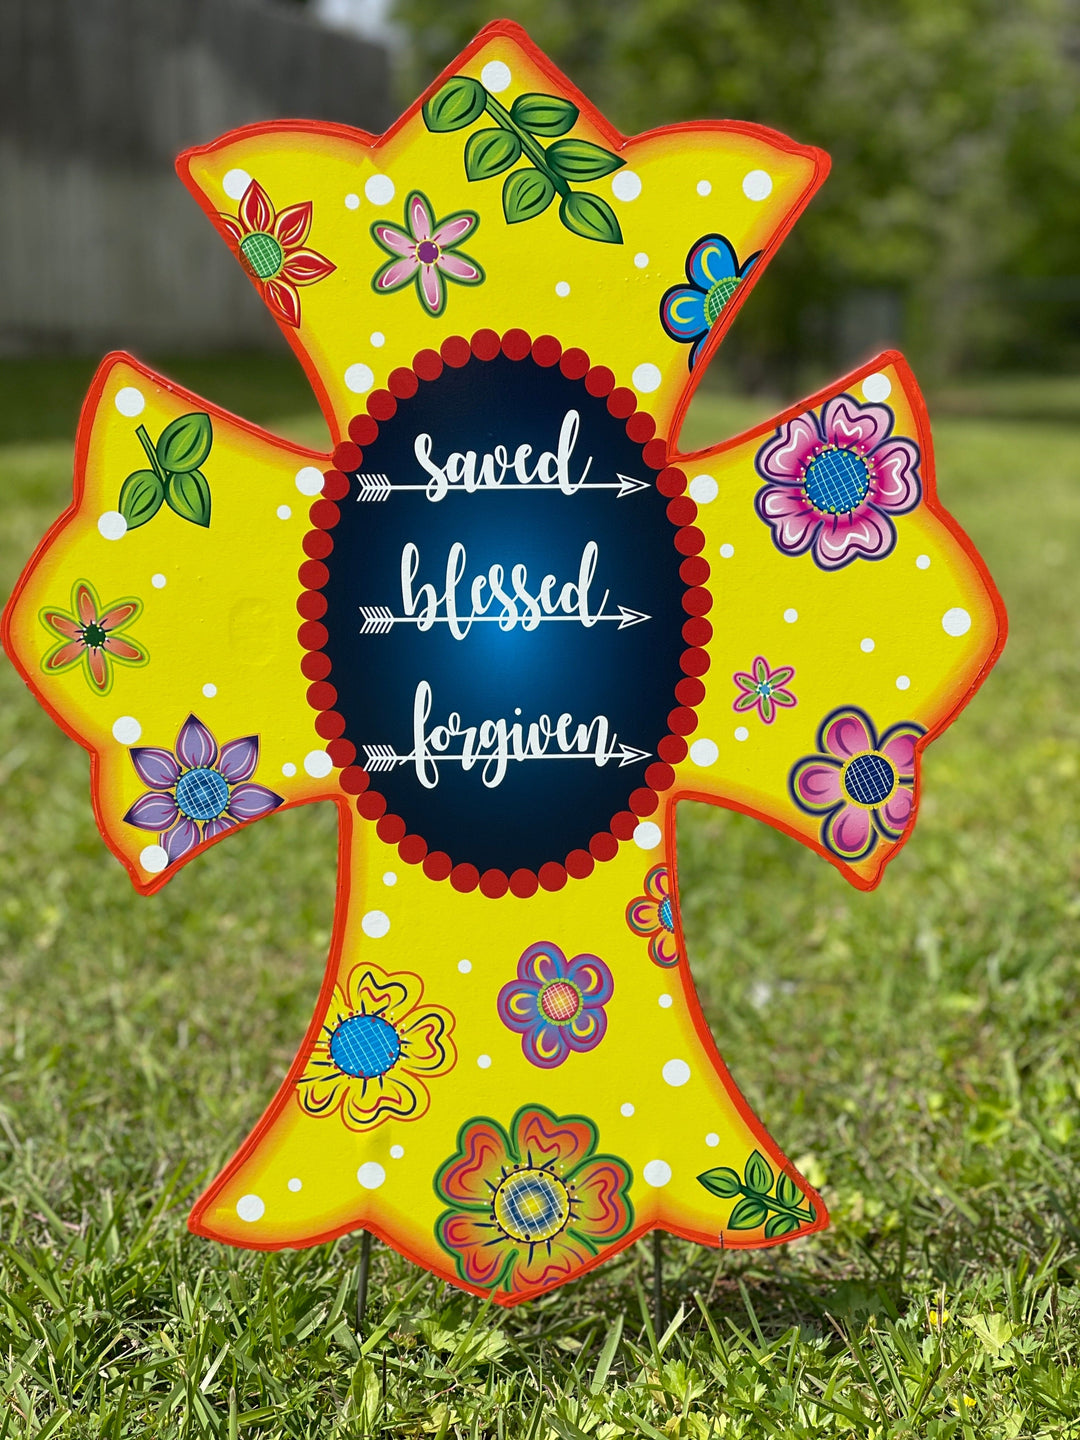 Saved, Blessed, Forgiven yard art cross